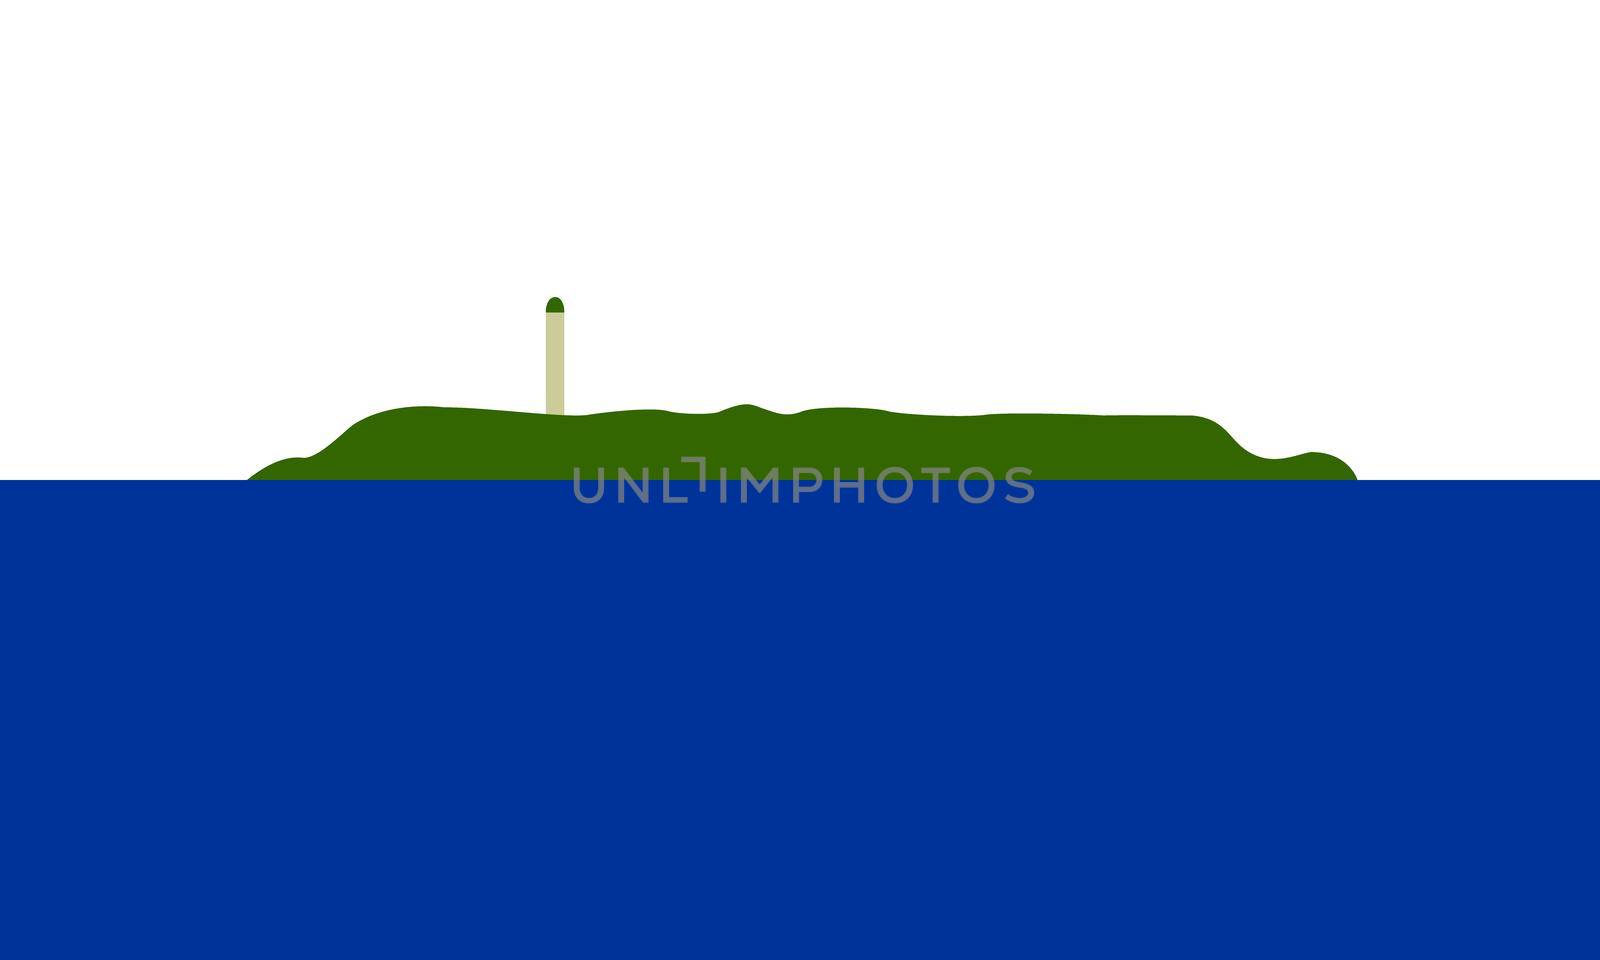 Navassa Island flag in real proportions and colors, vector image